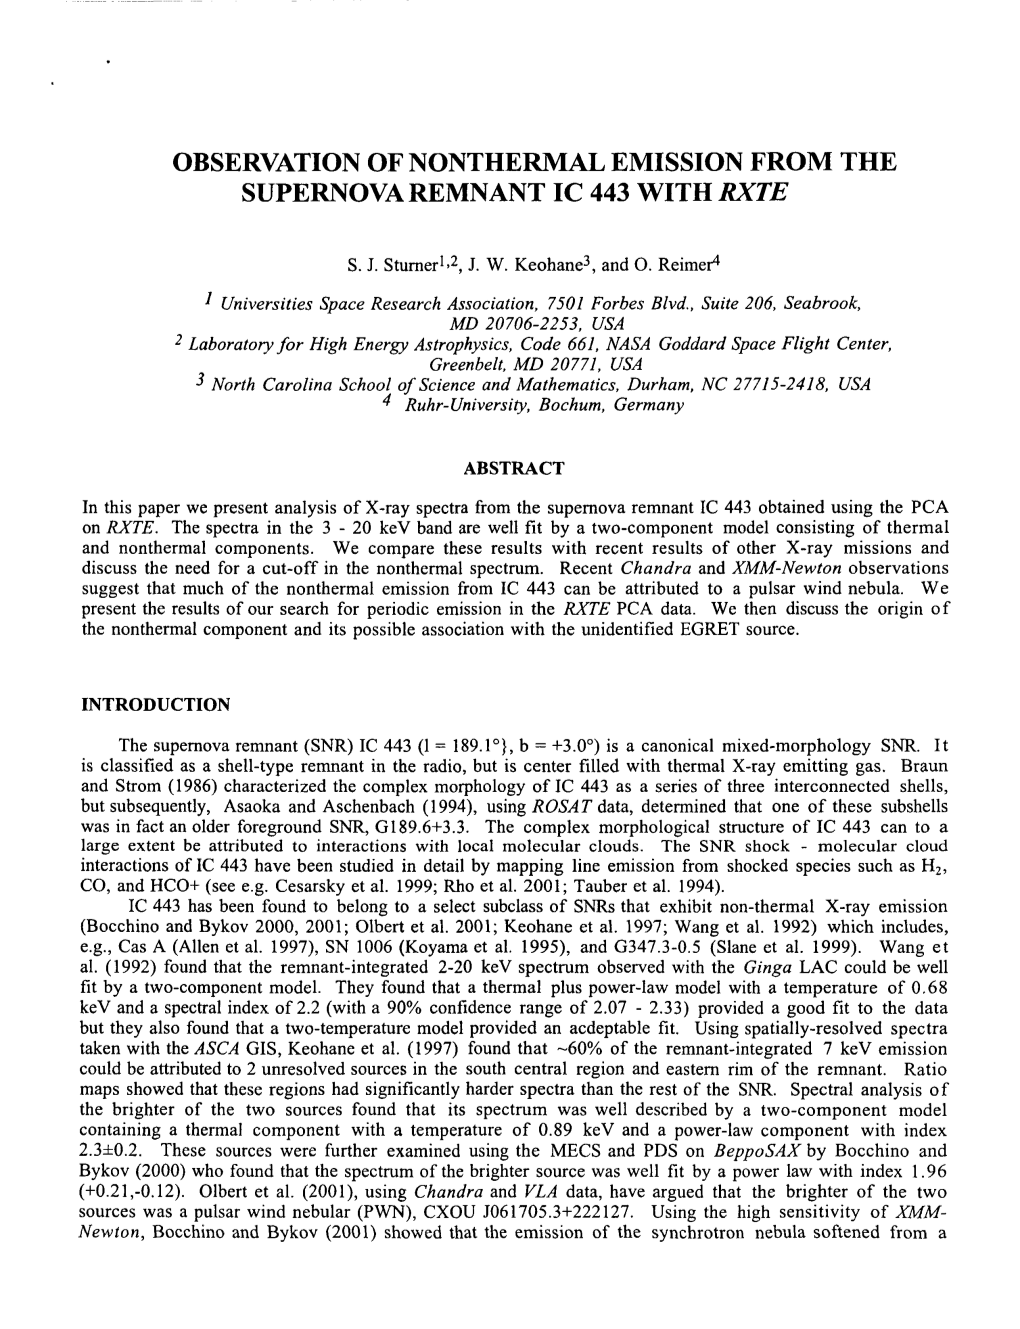 Observation of Nonthermal Emission from the Supernova Remnant Ic 443 with Rxte